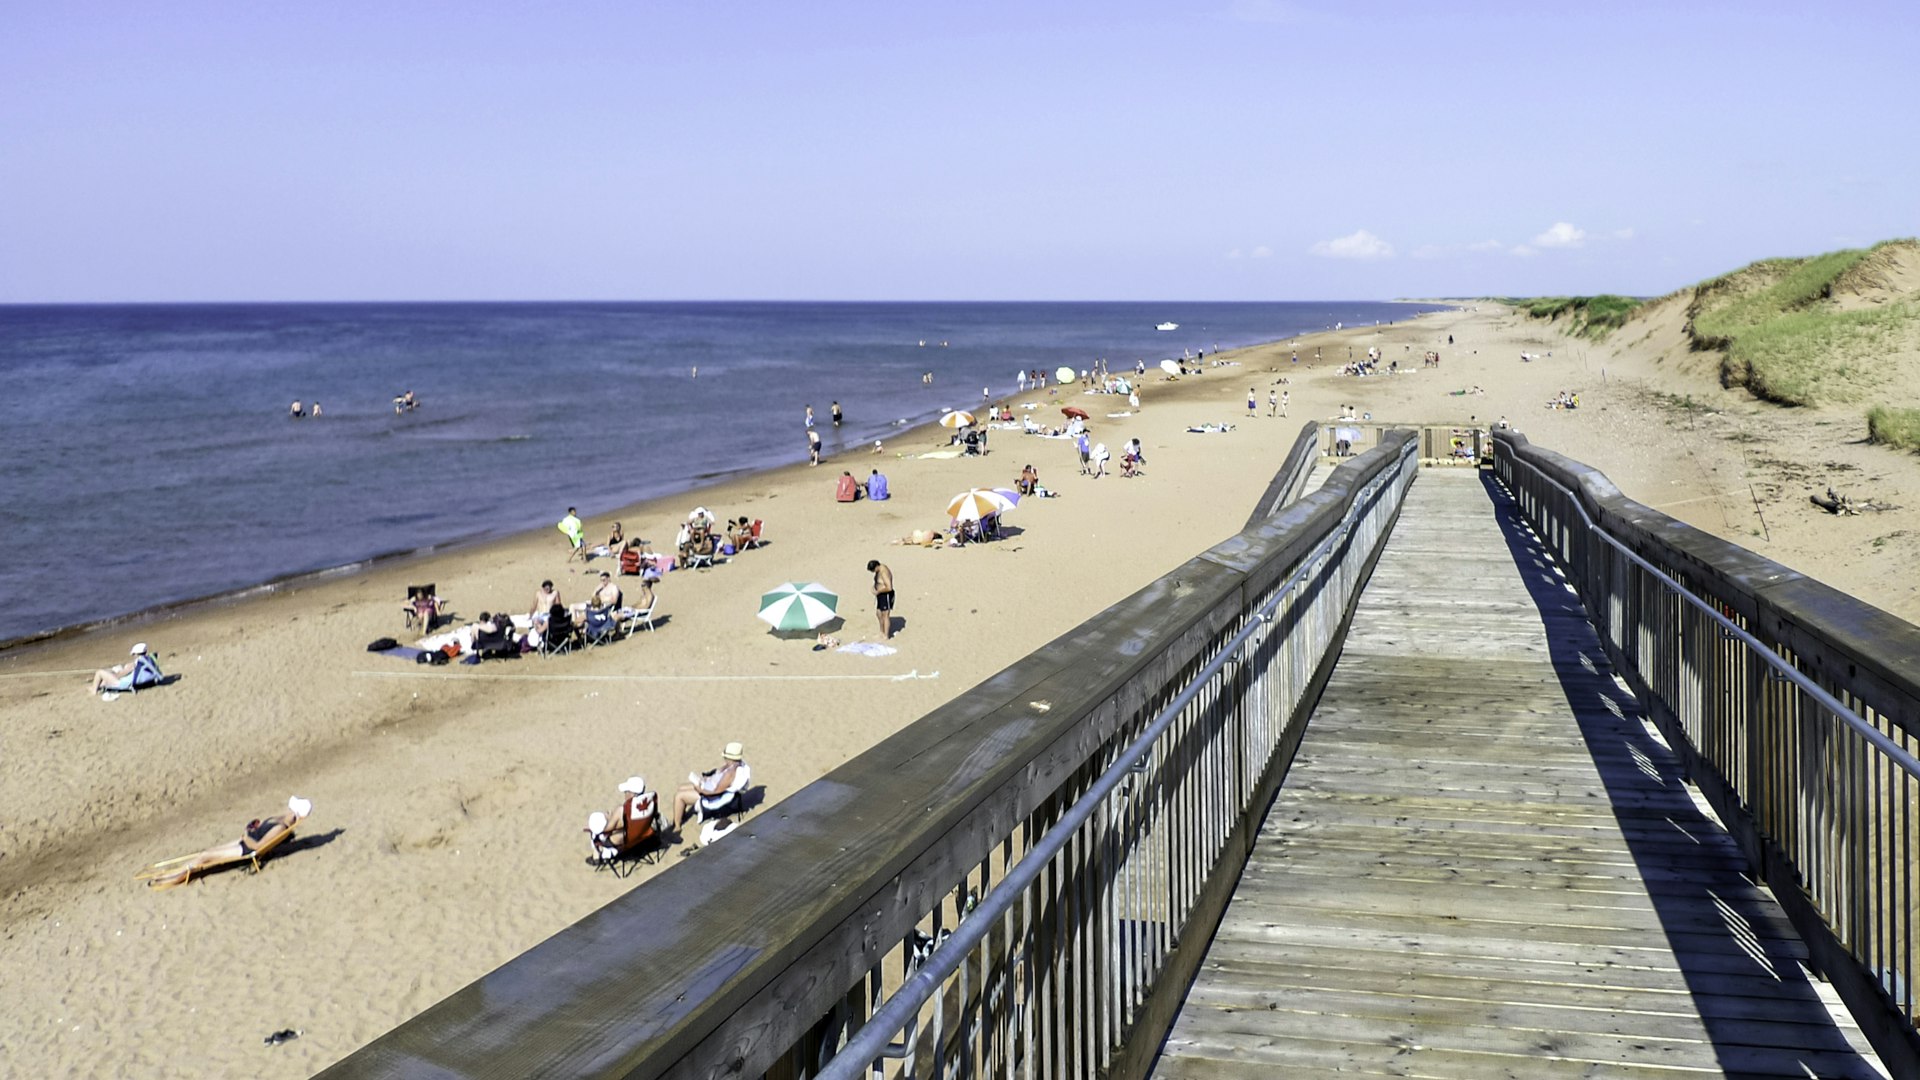 A sloping boardwalk leads down to a sandy beach, where many people are relaxing on the shorefront and swimming in the sea